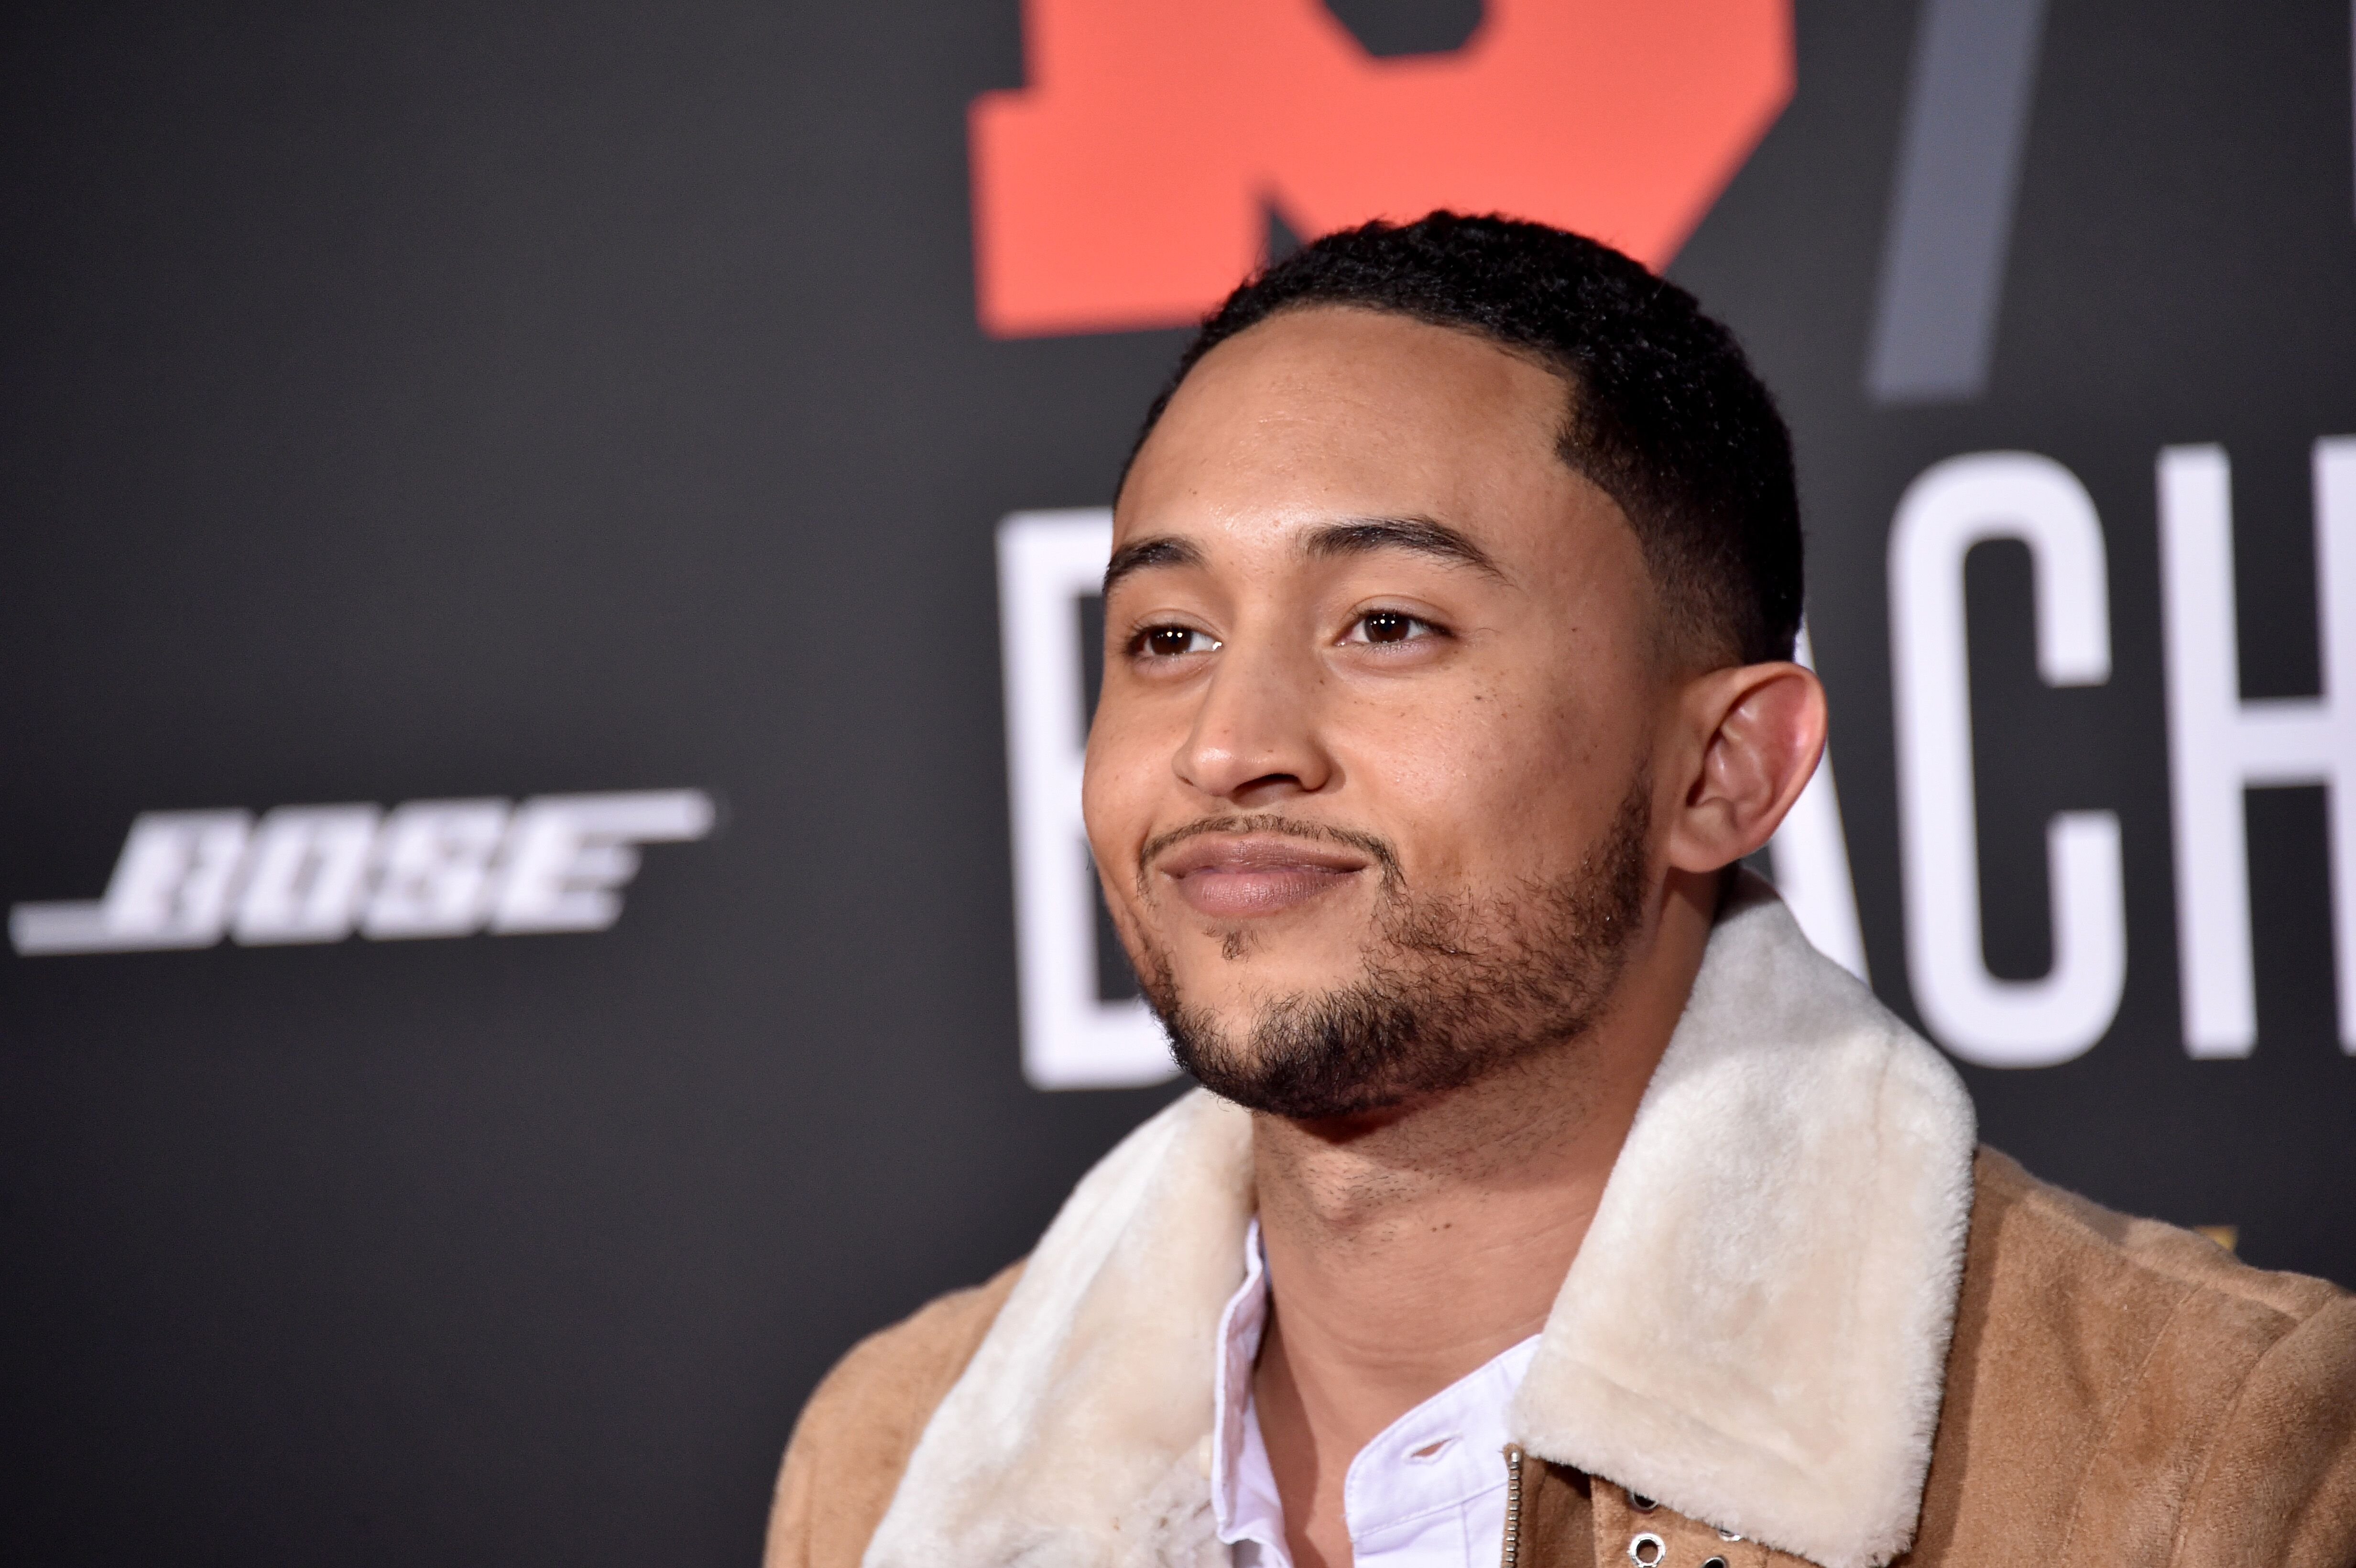 Tahj Mowry during the Bleacher Report Bleacher Ball on February 5, 2016 in San Francisco, California.  | Photo: Getty Images